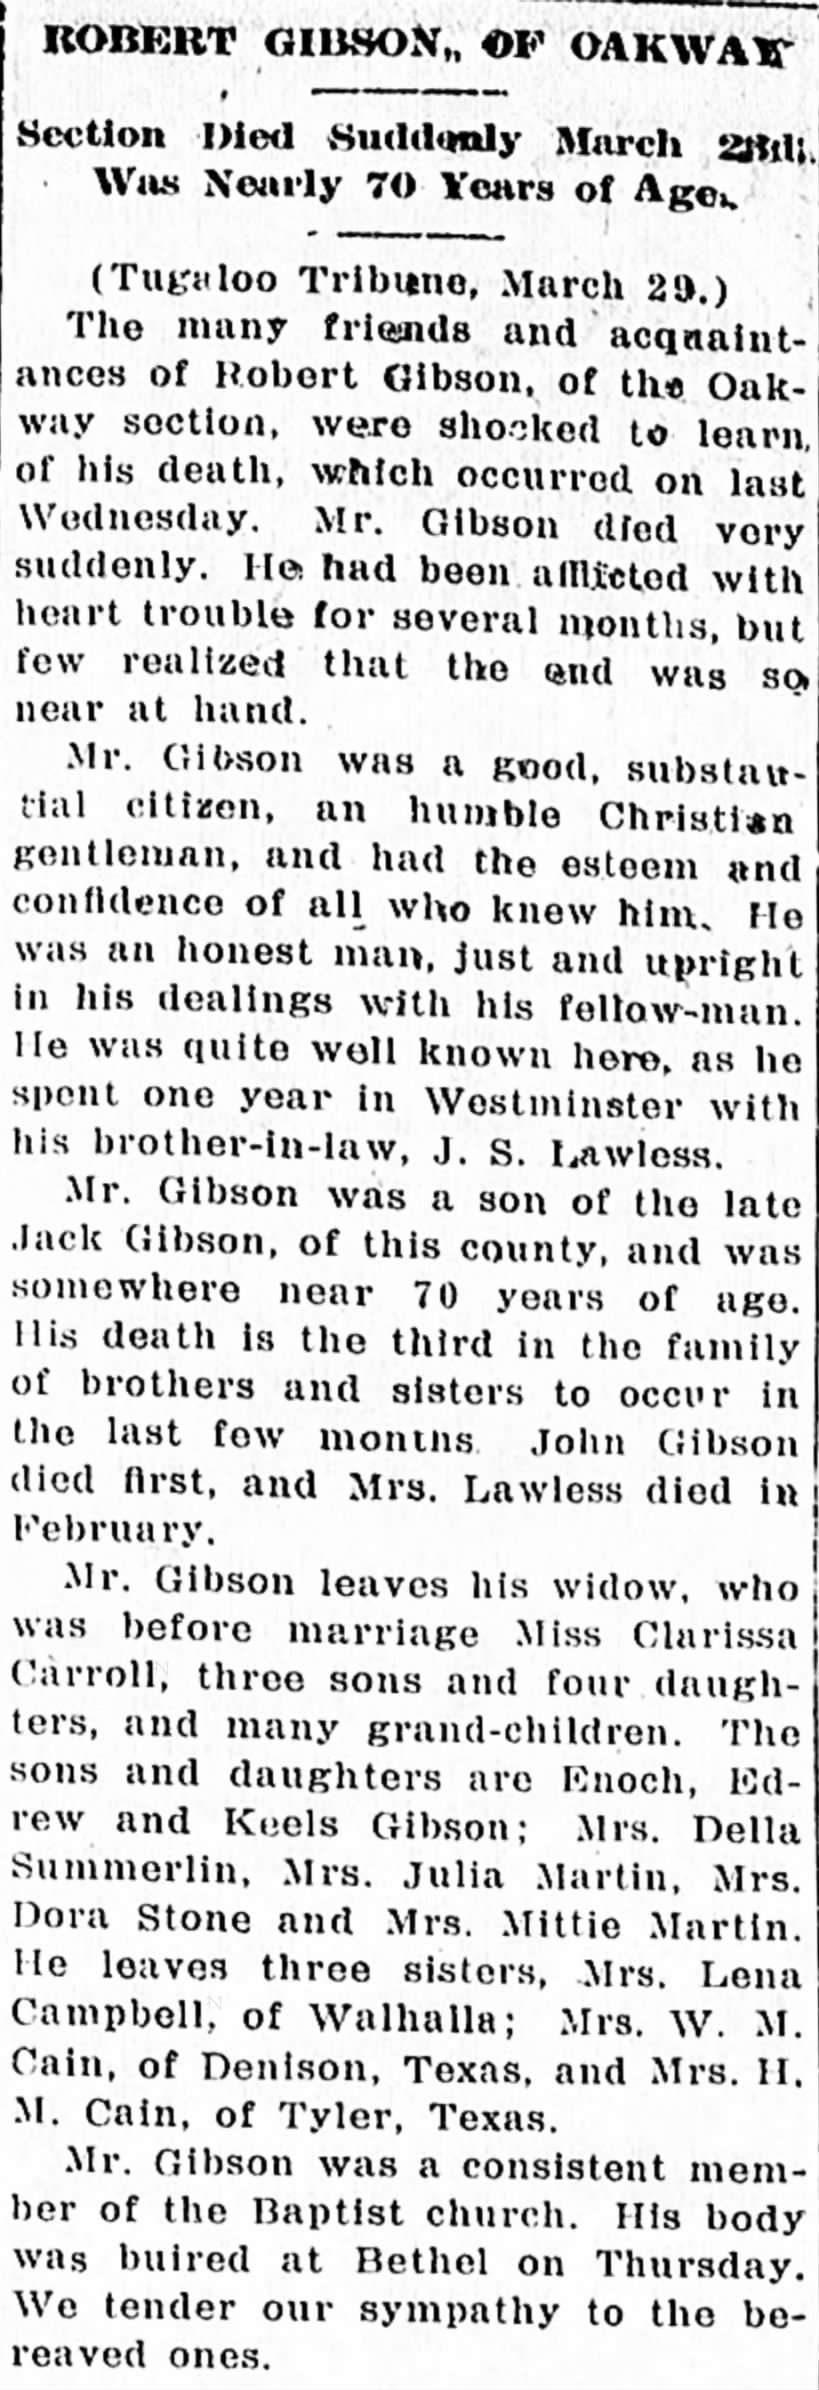 6 Apr 1921 Keowee Courier; Robert Gibson son of Jack Gibson